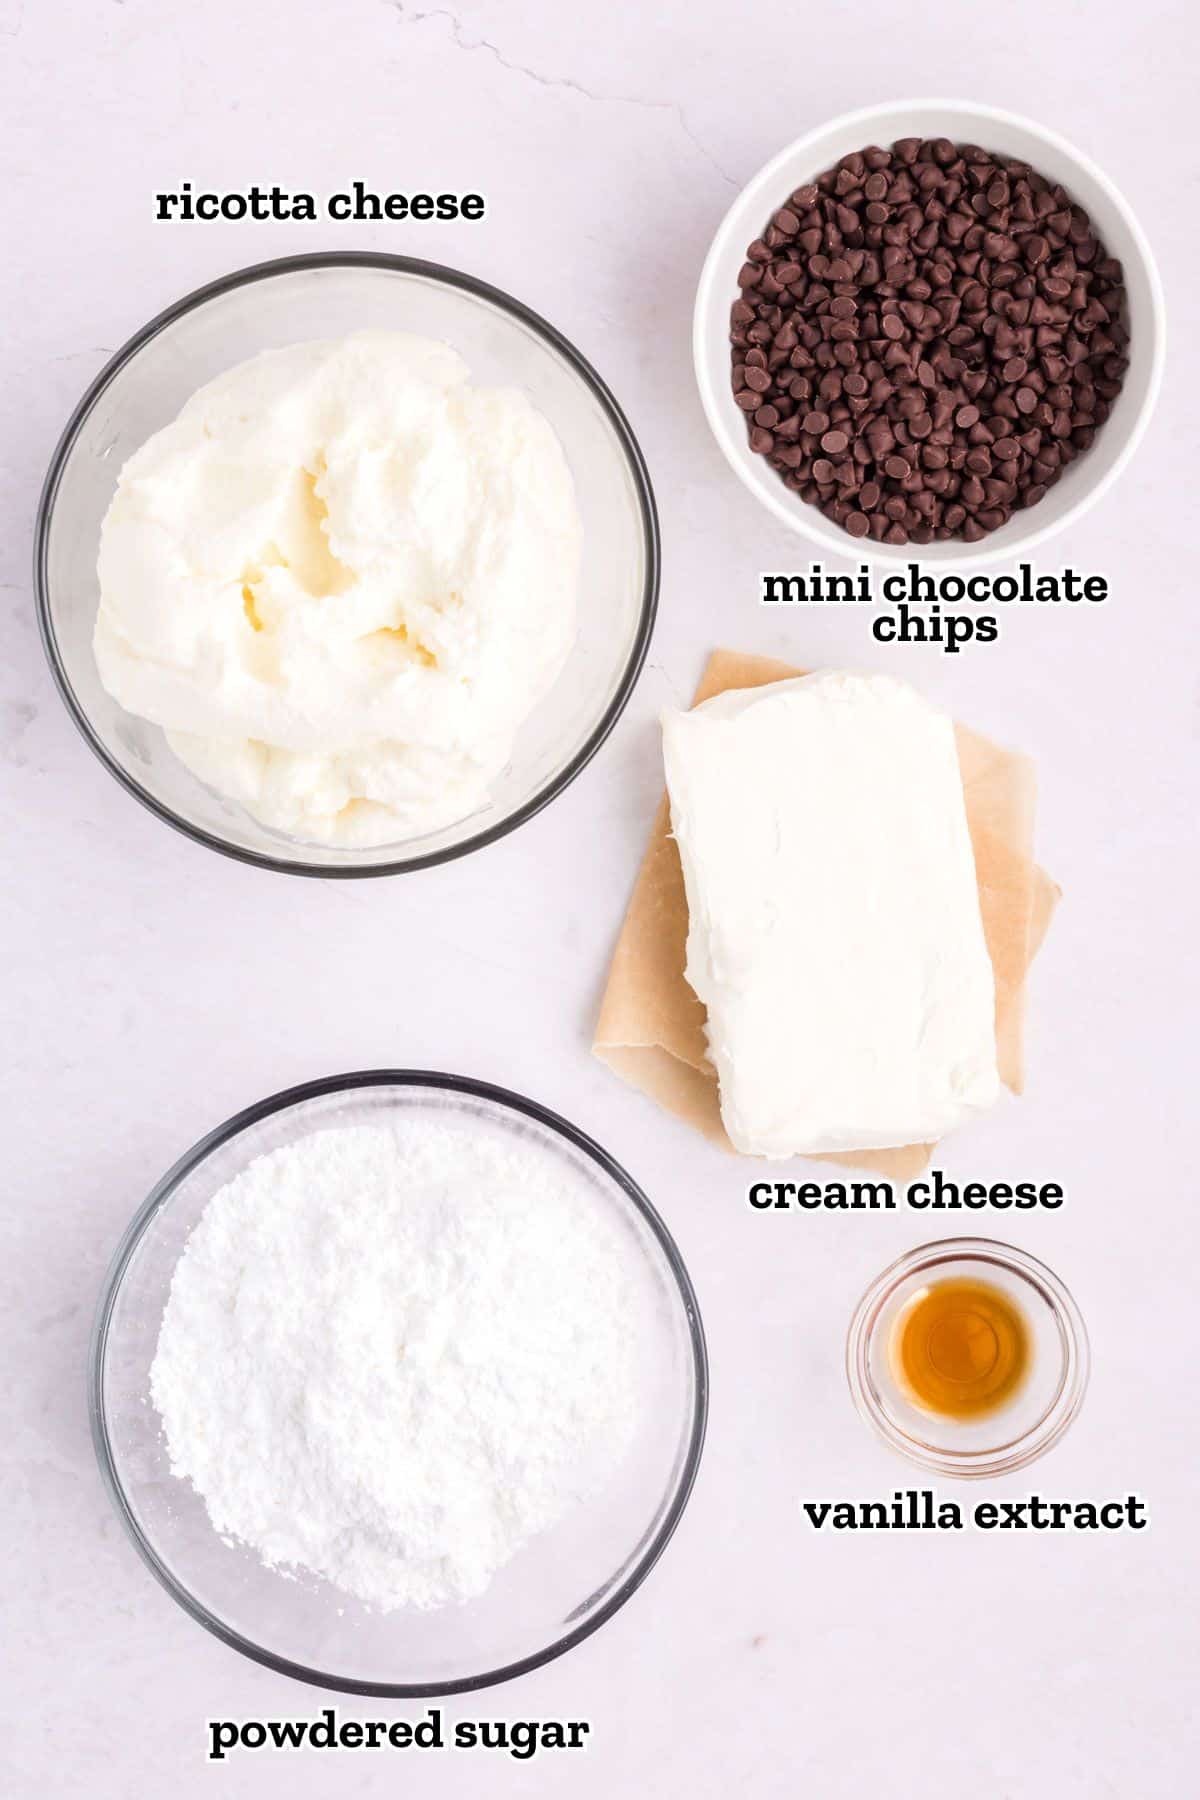 Labeled ingredients needed to make a cannoli dip.